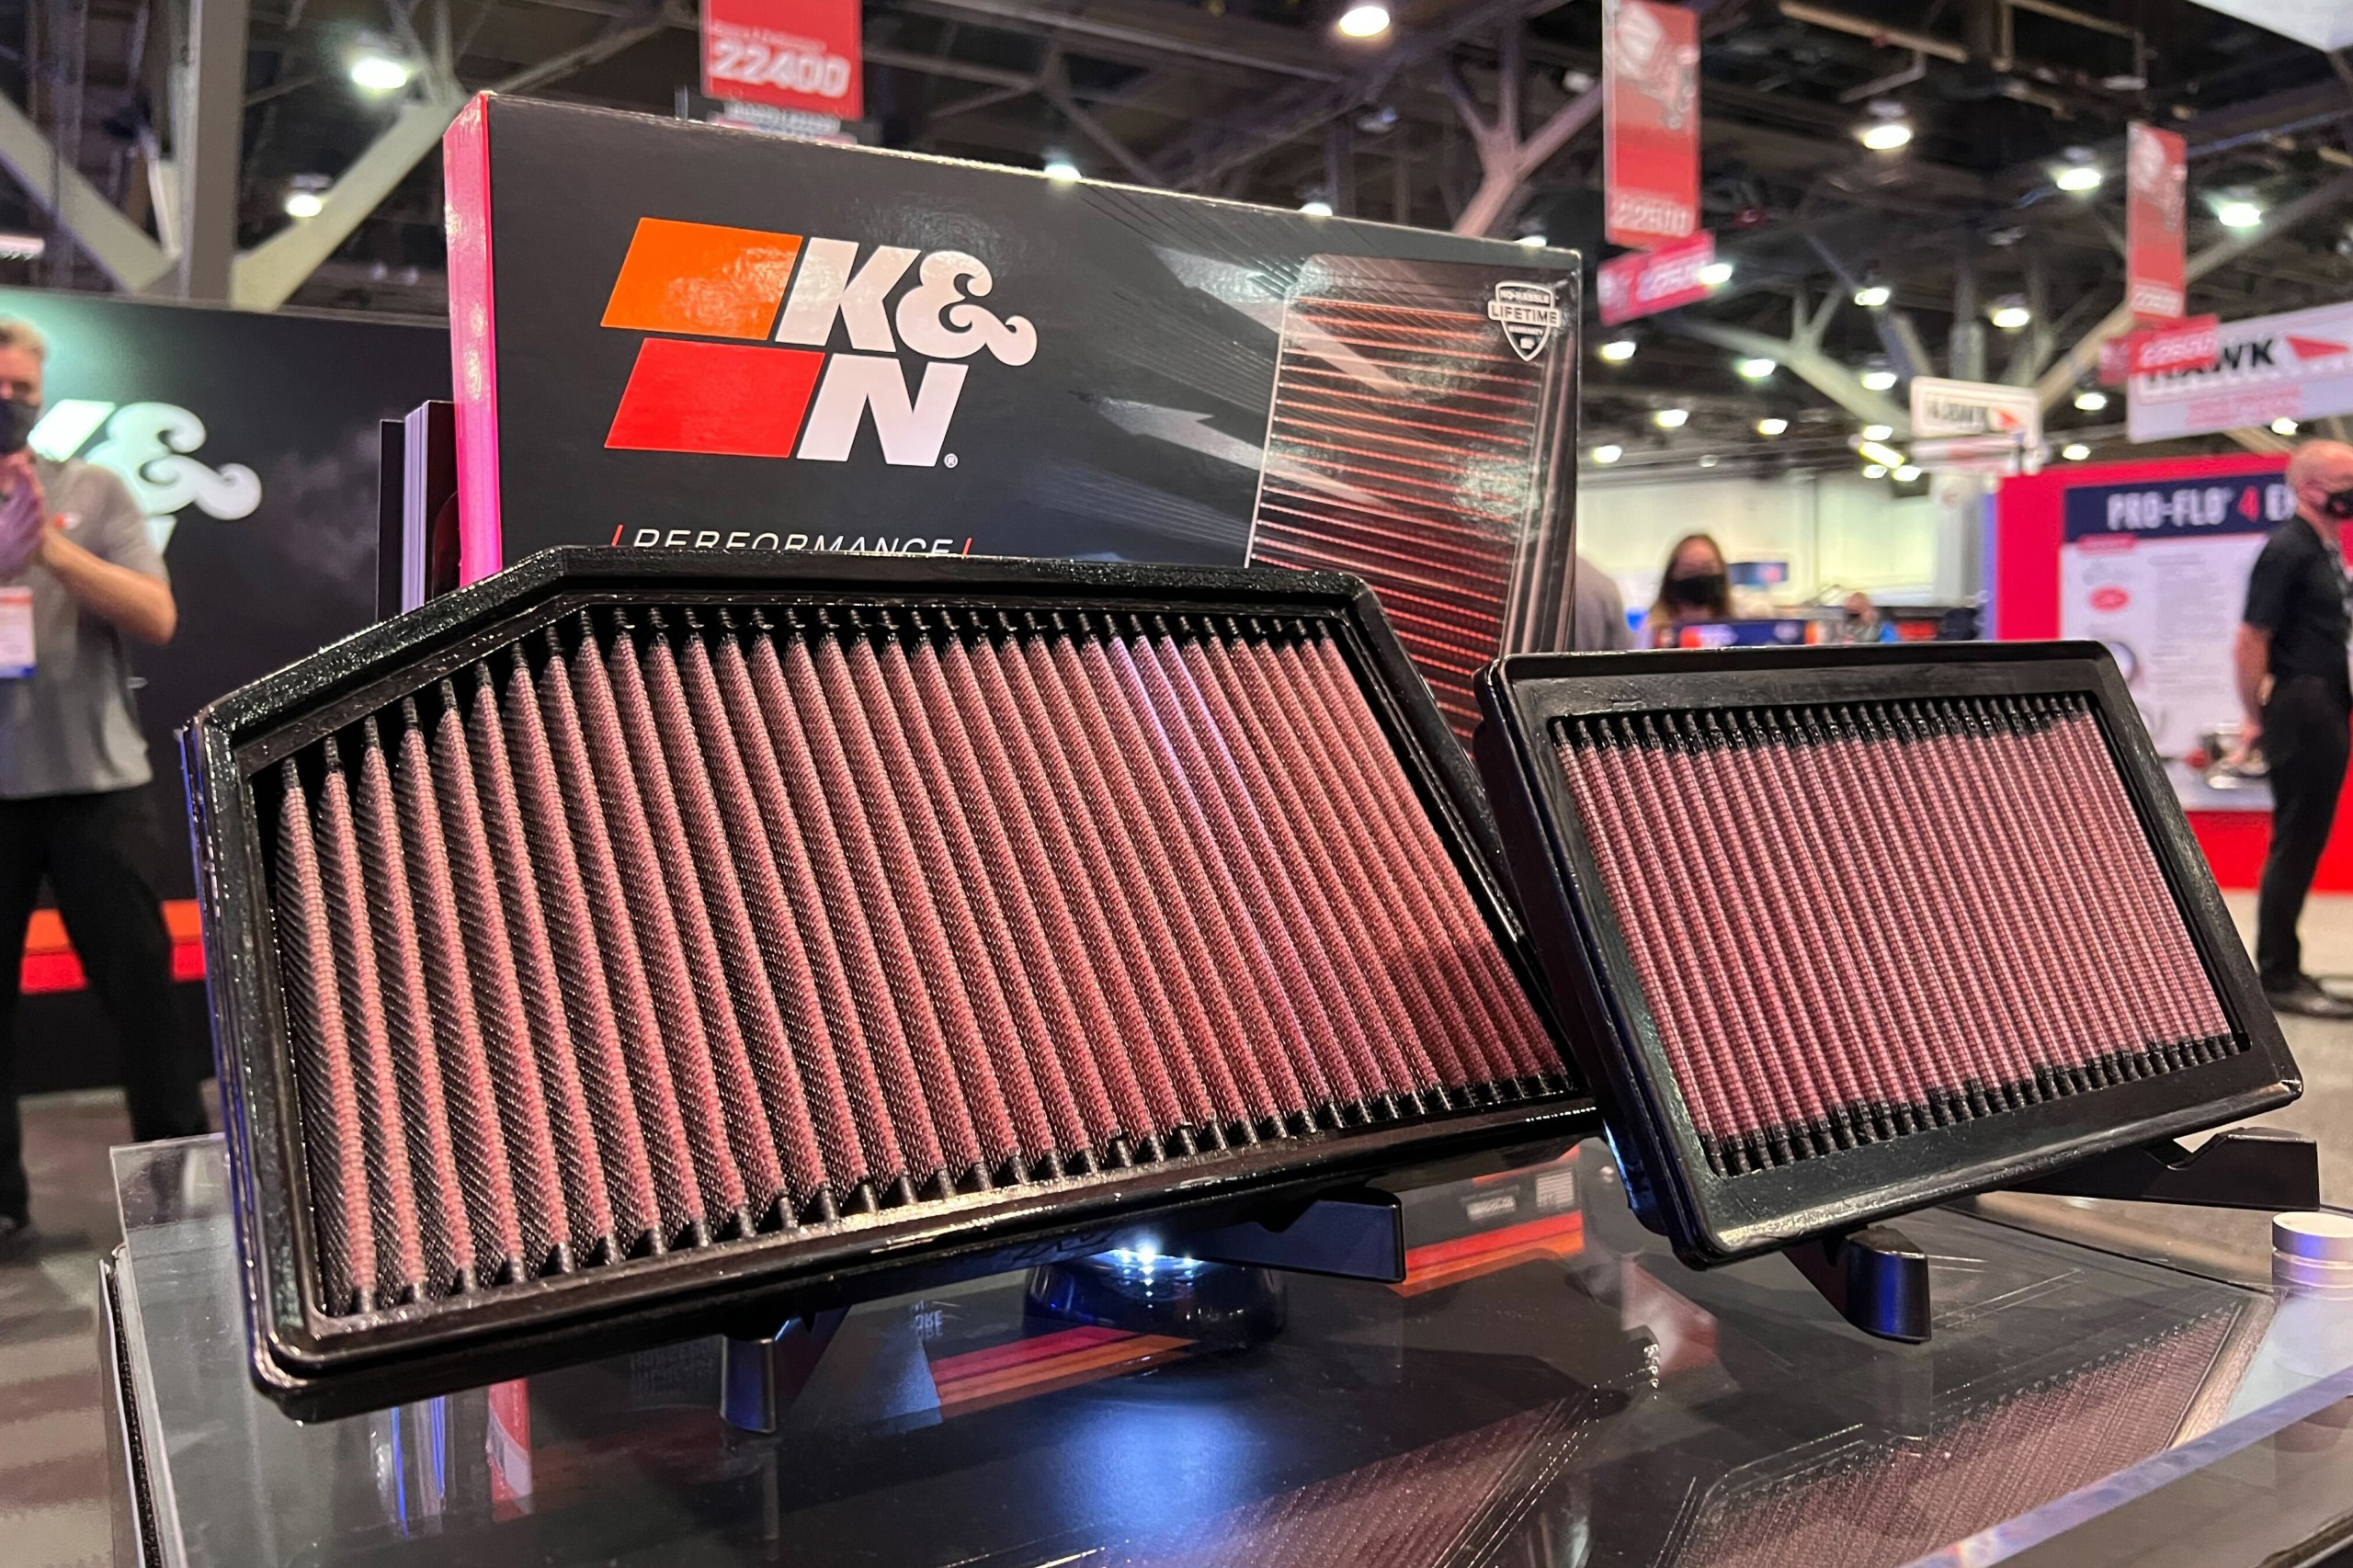 SEMA 2021: K&N Engineering Focuses On Fine Details For The Future